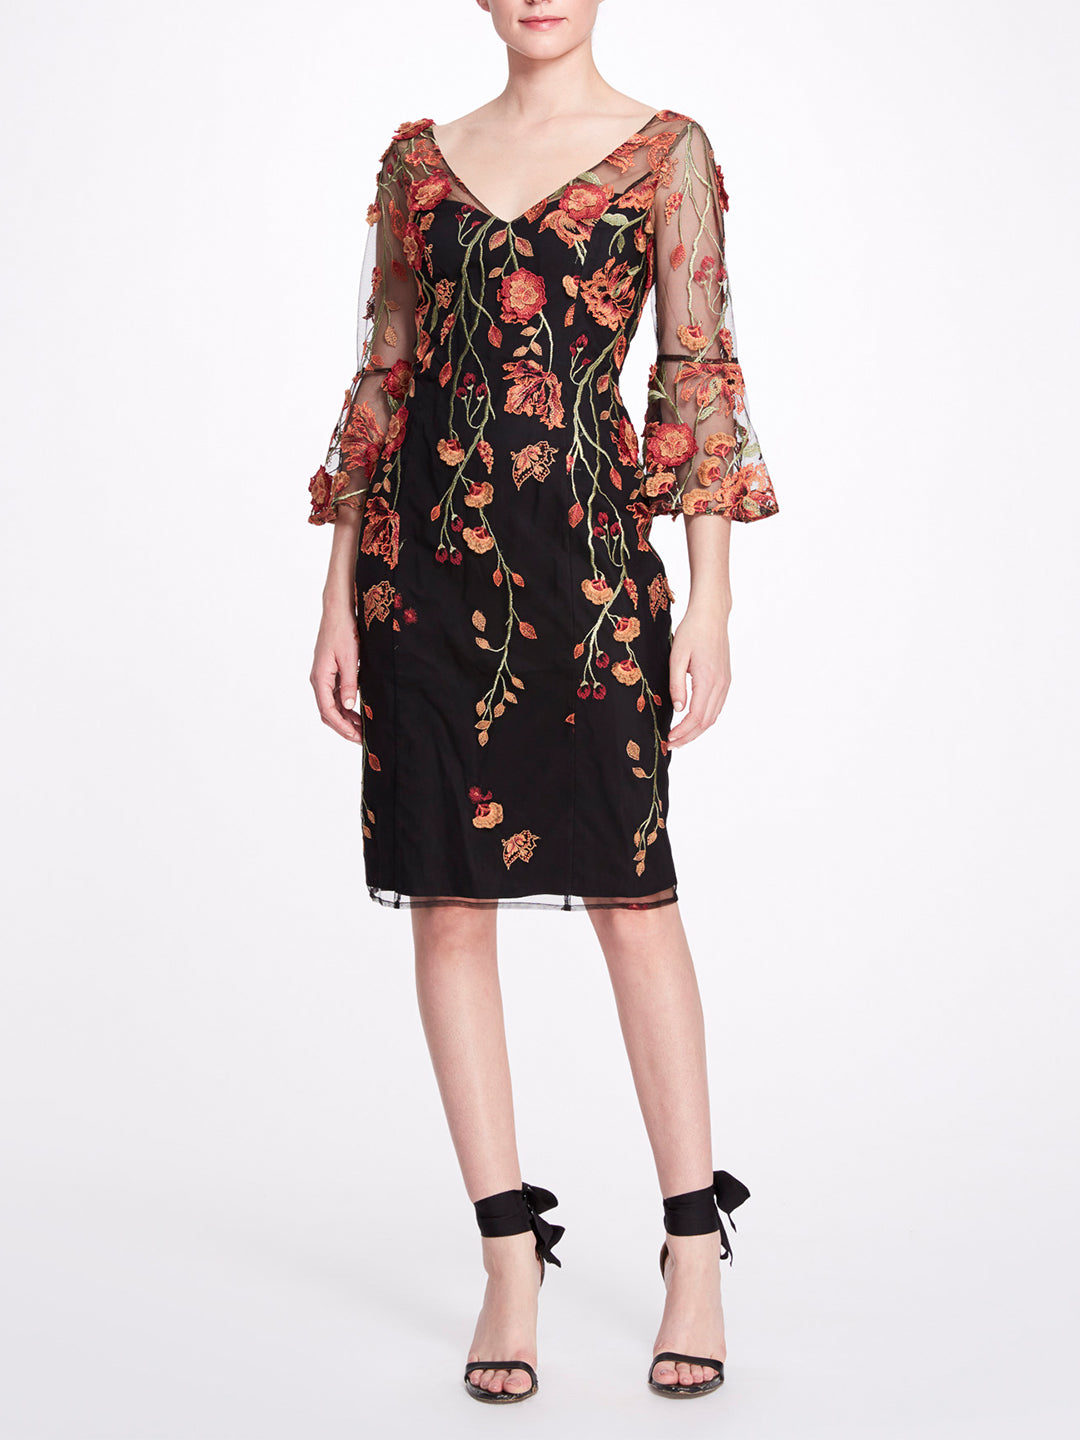 Embroidered Floral Cocktail Dress ...